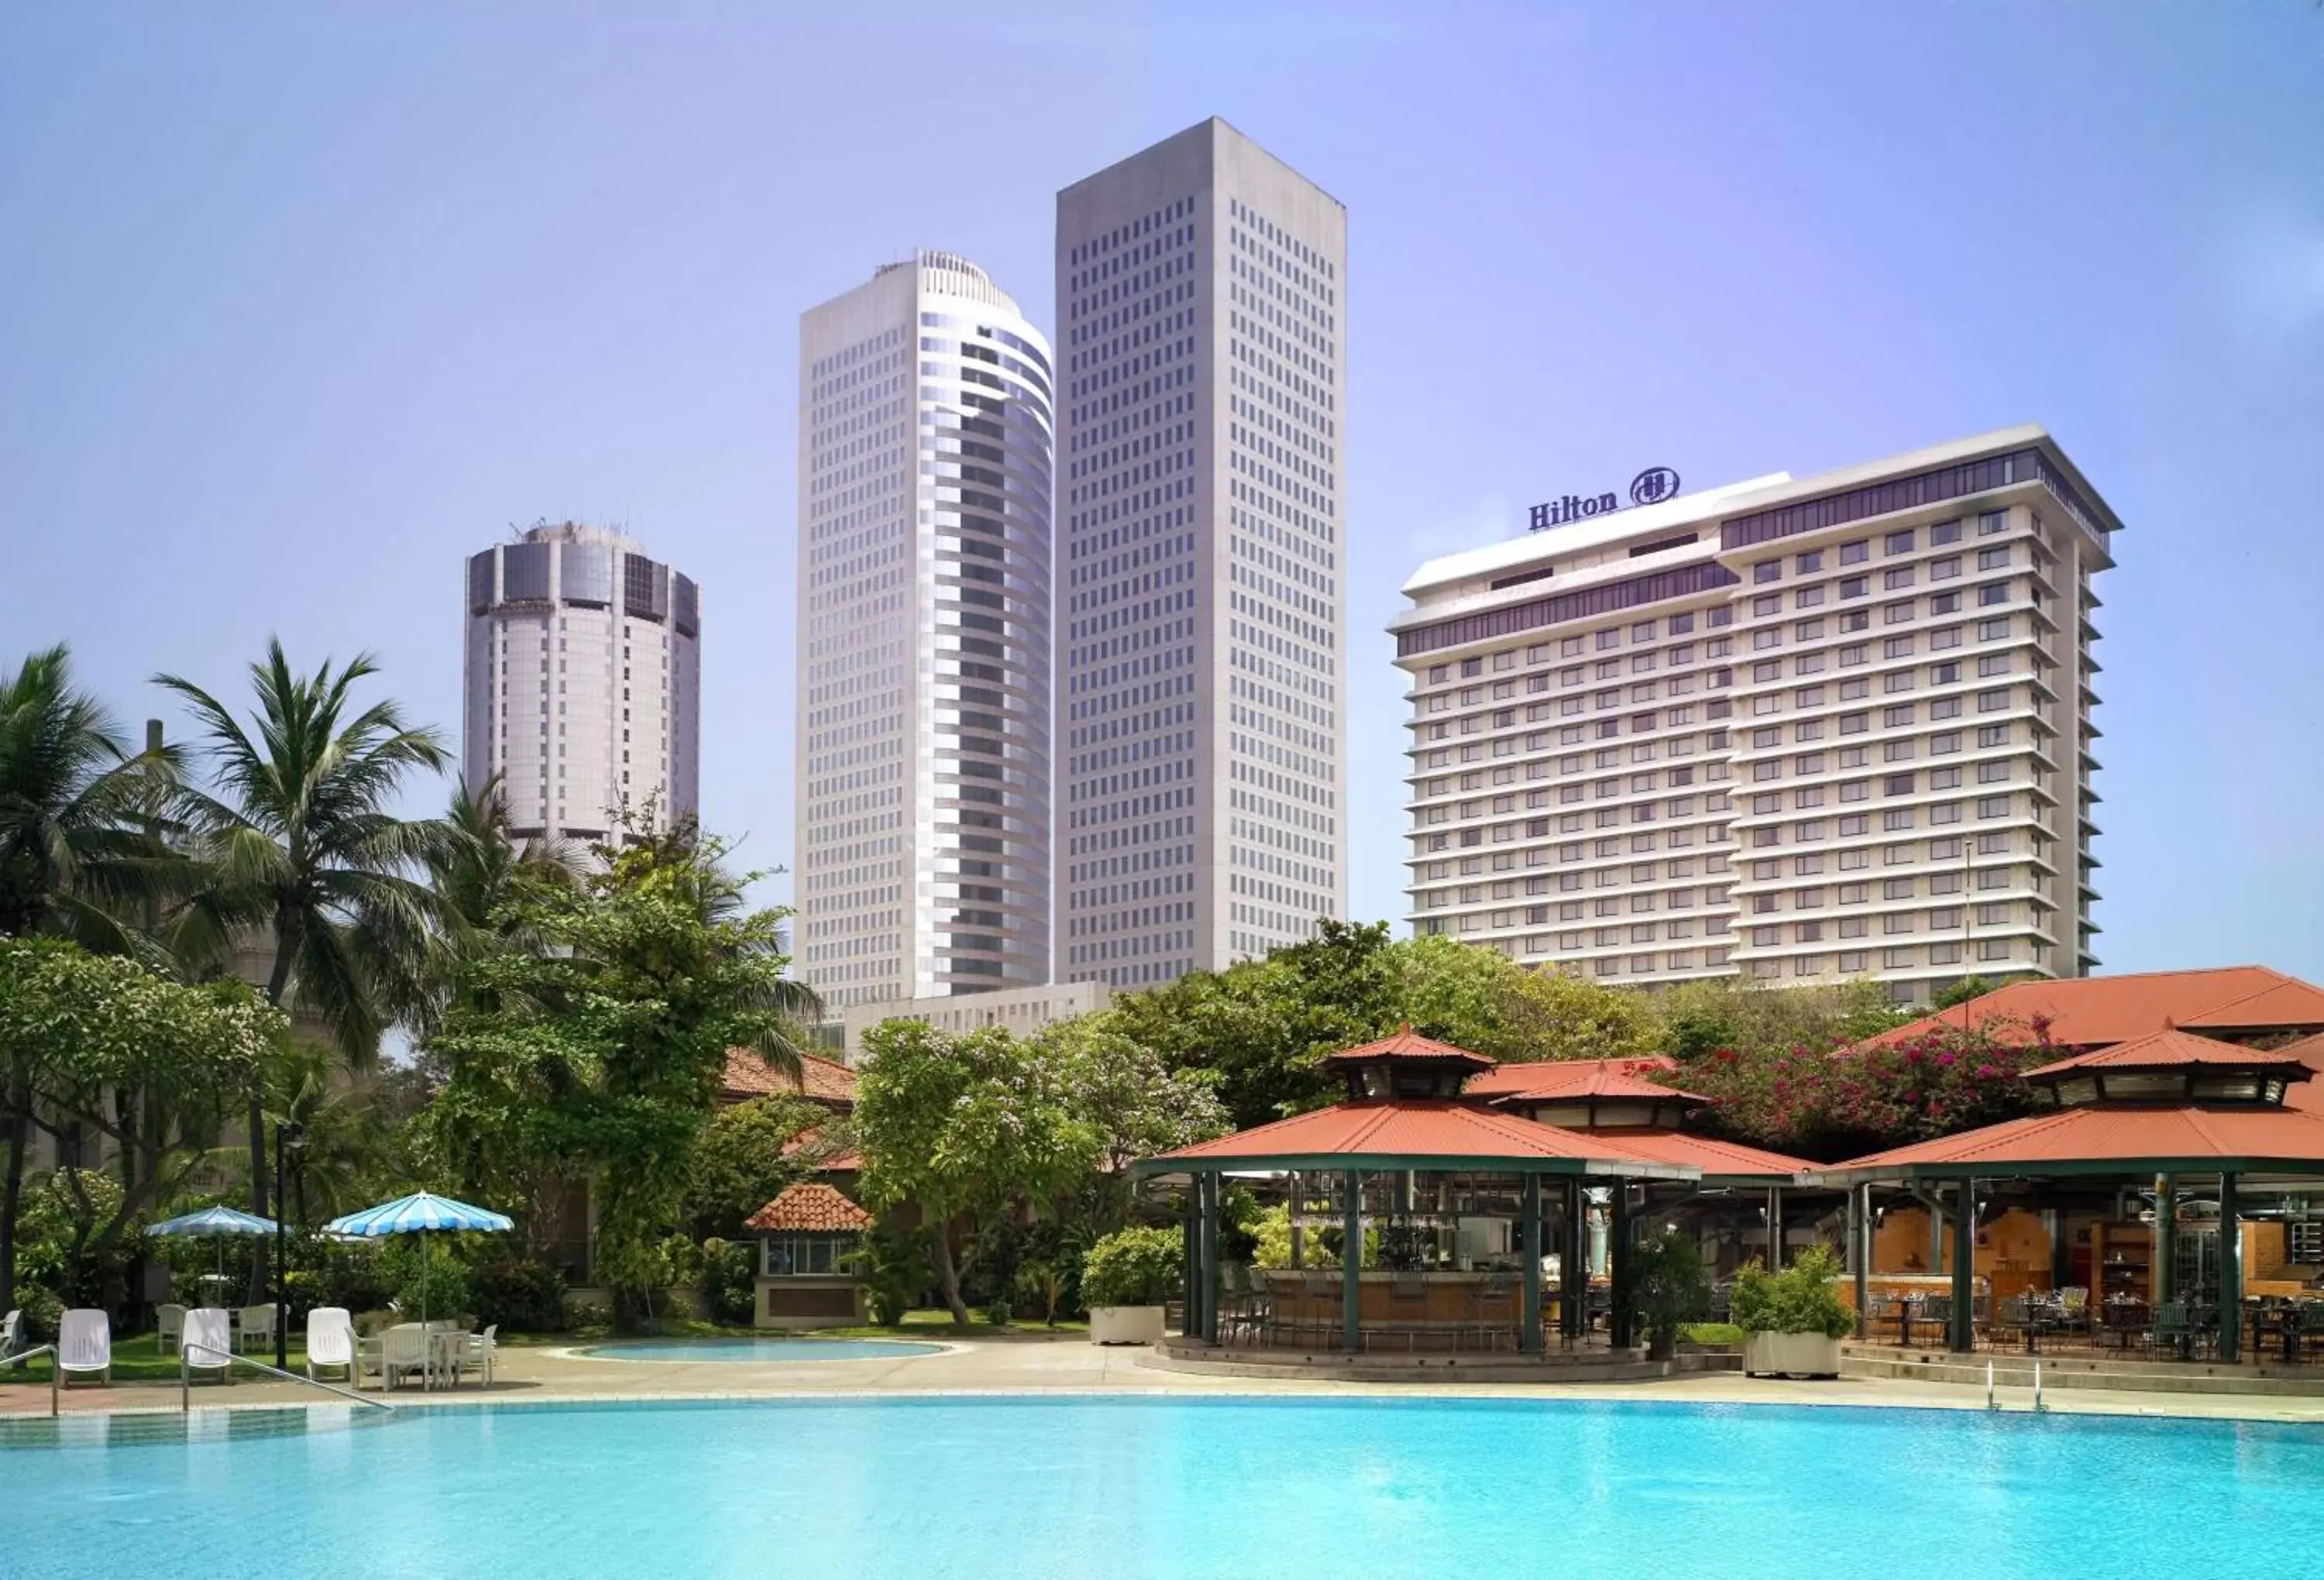 Property building, Swimming Pool in Hilton Colombo Hotel